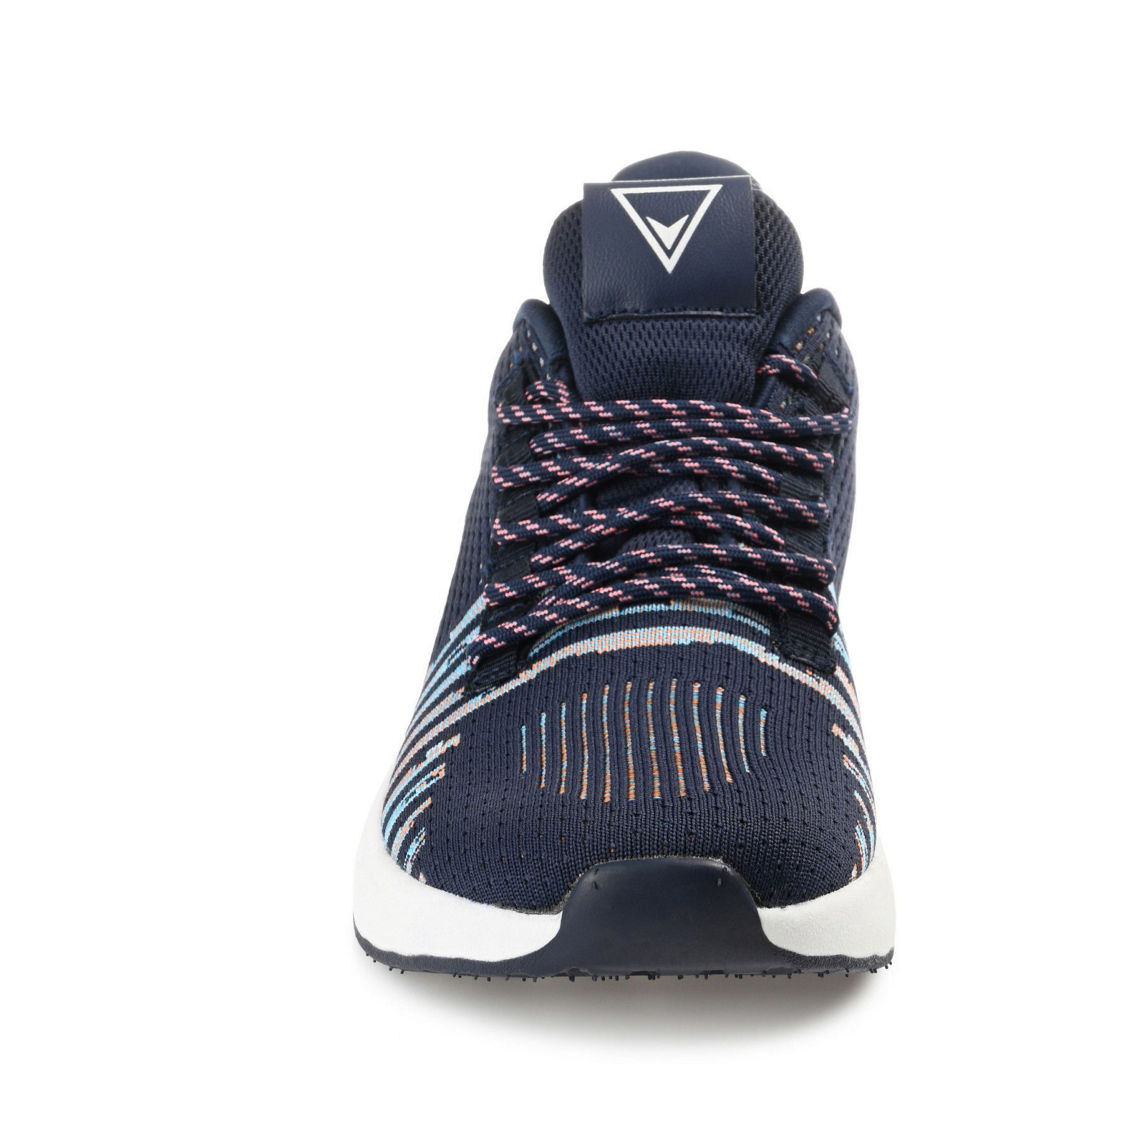 Vance Co. Brewer Knit Athleisure Sneaker - Image 2 of 4